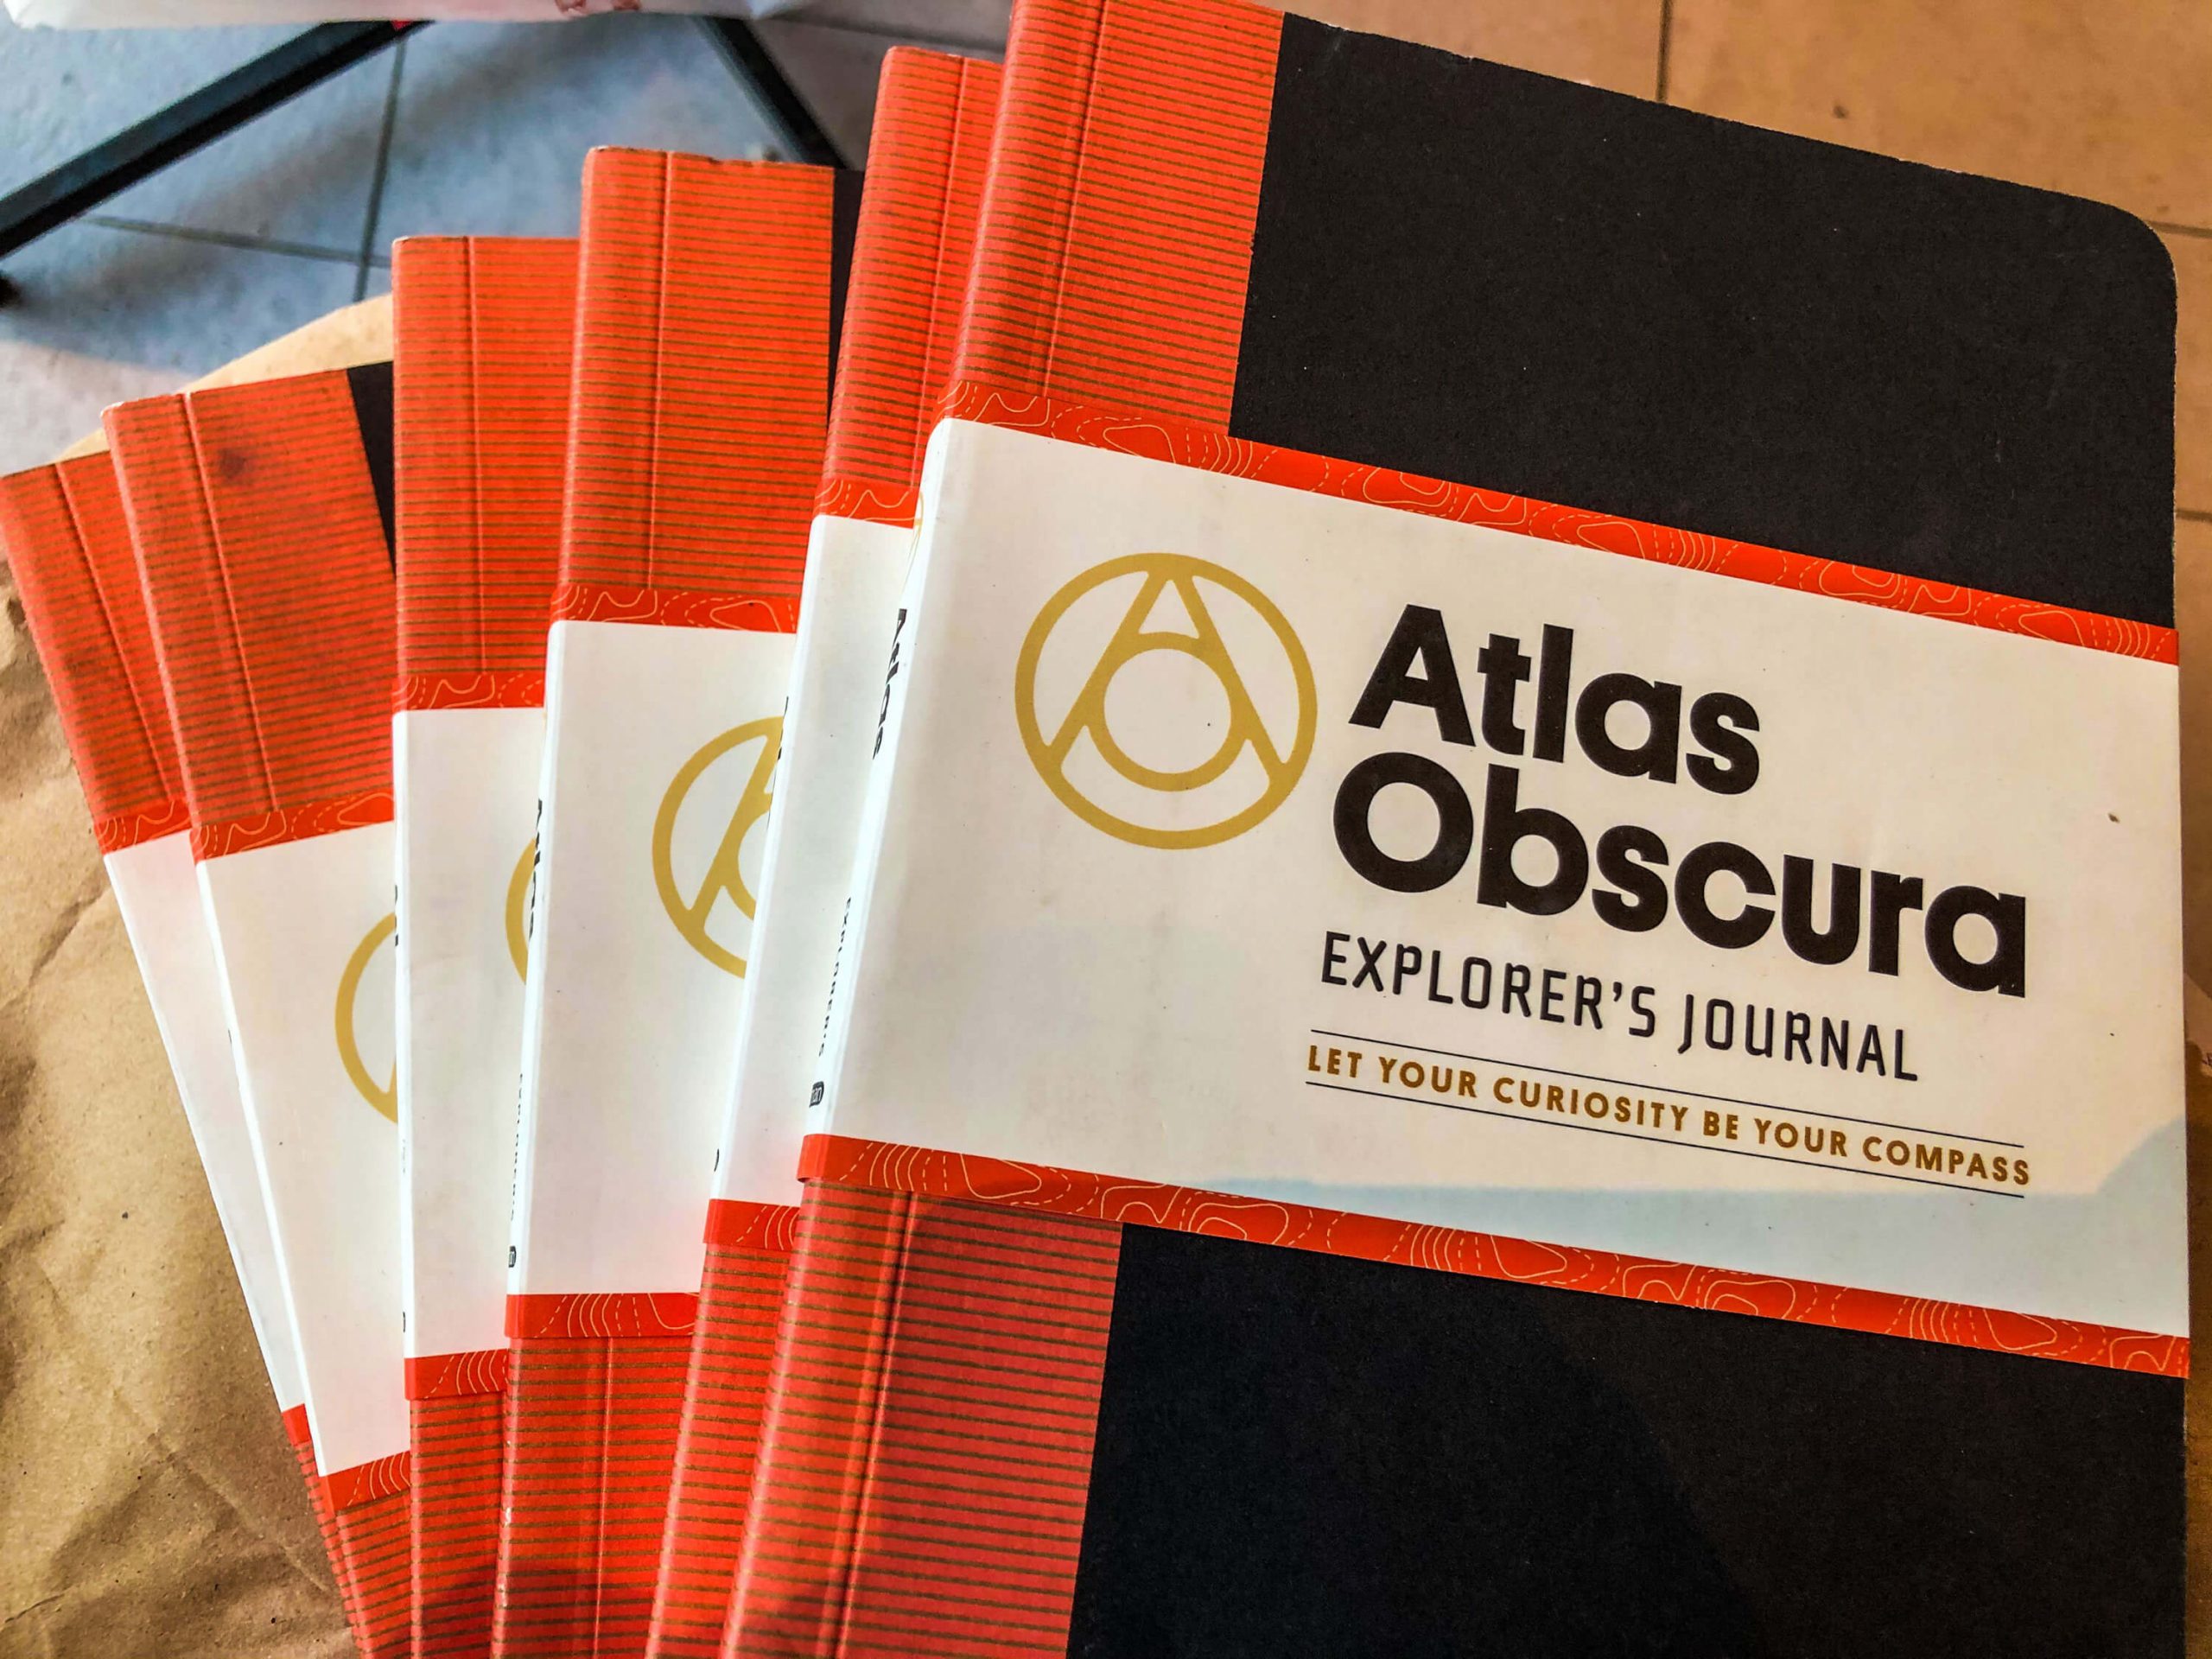 ON SALE. Bought these Atlas Obscura Explorer’s Journal from Book Sale branches in Cebu City.